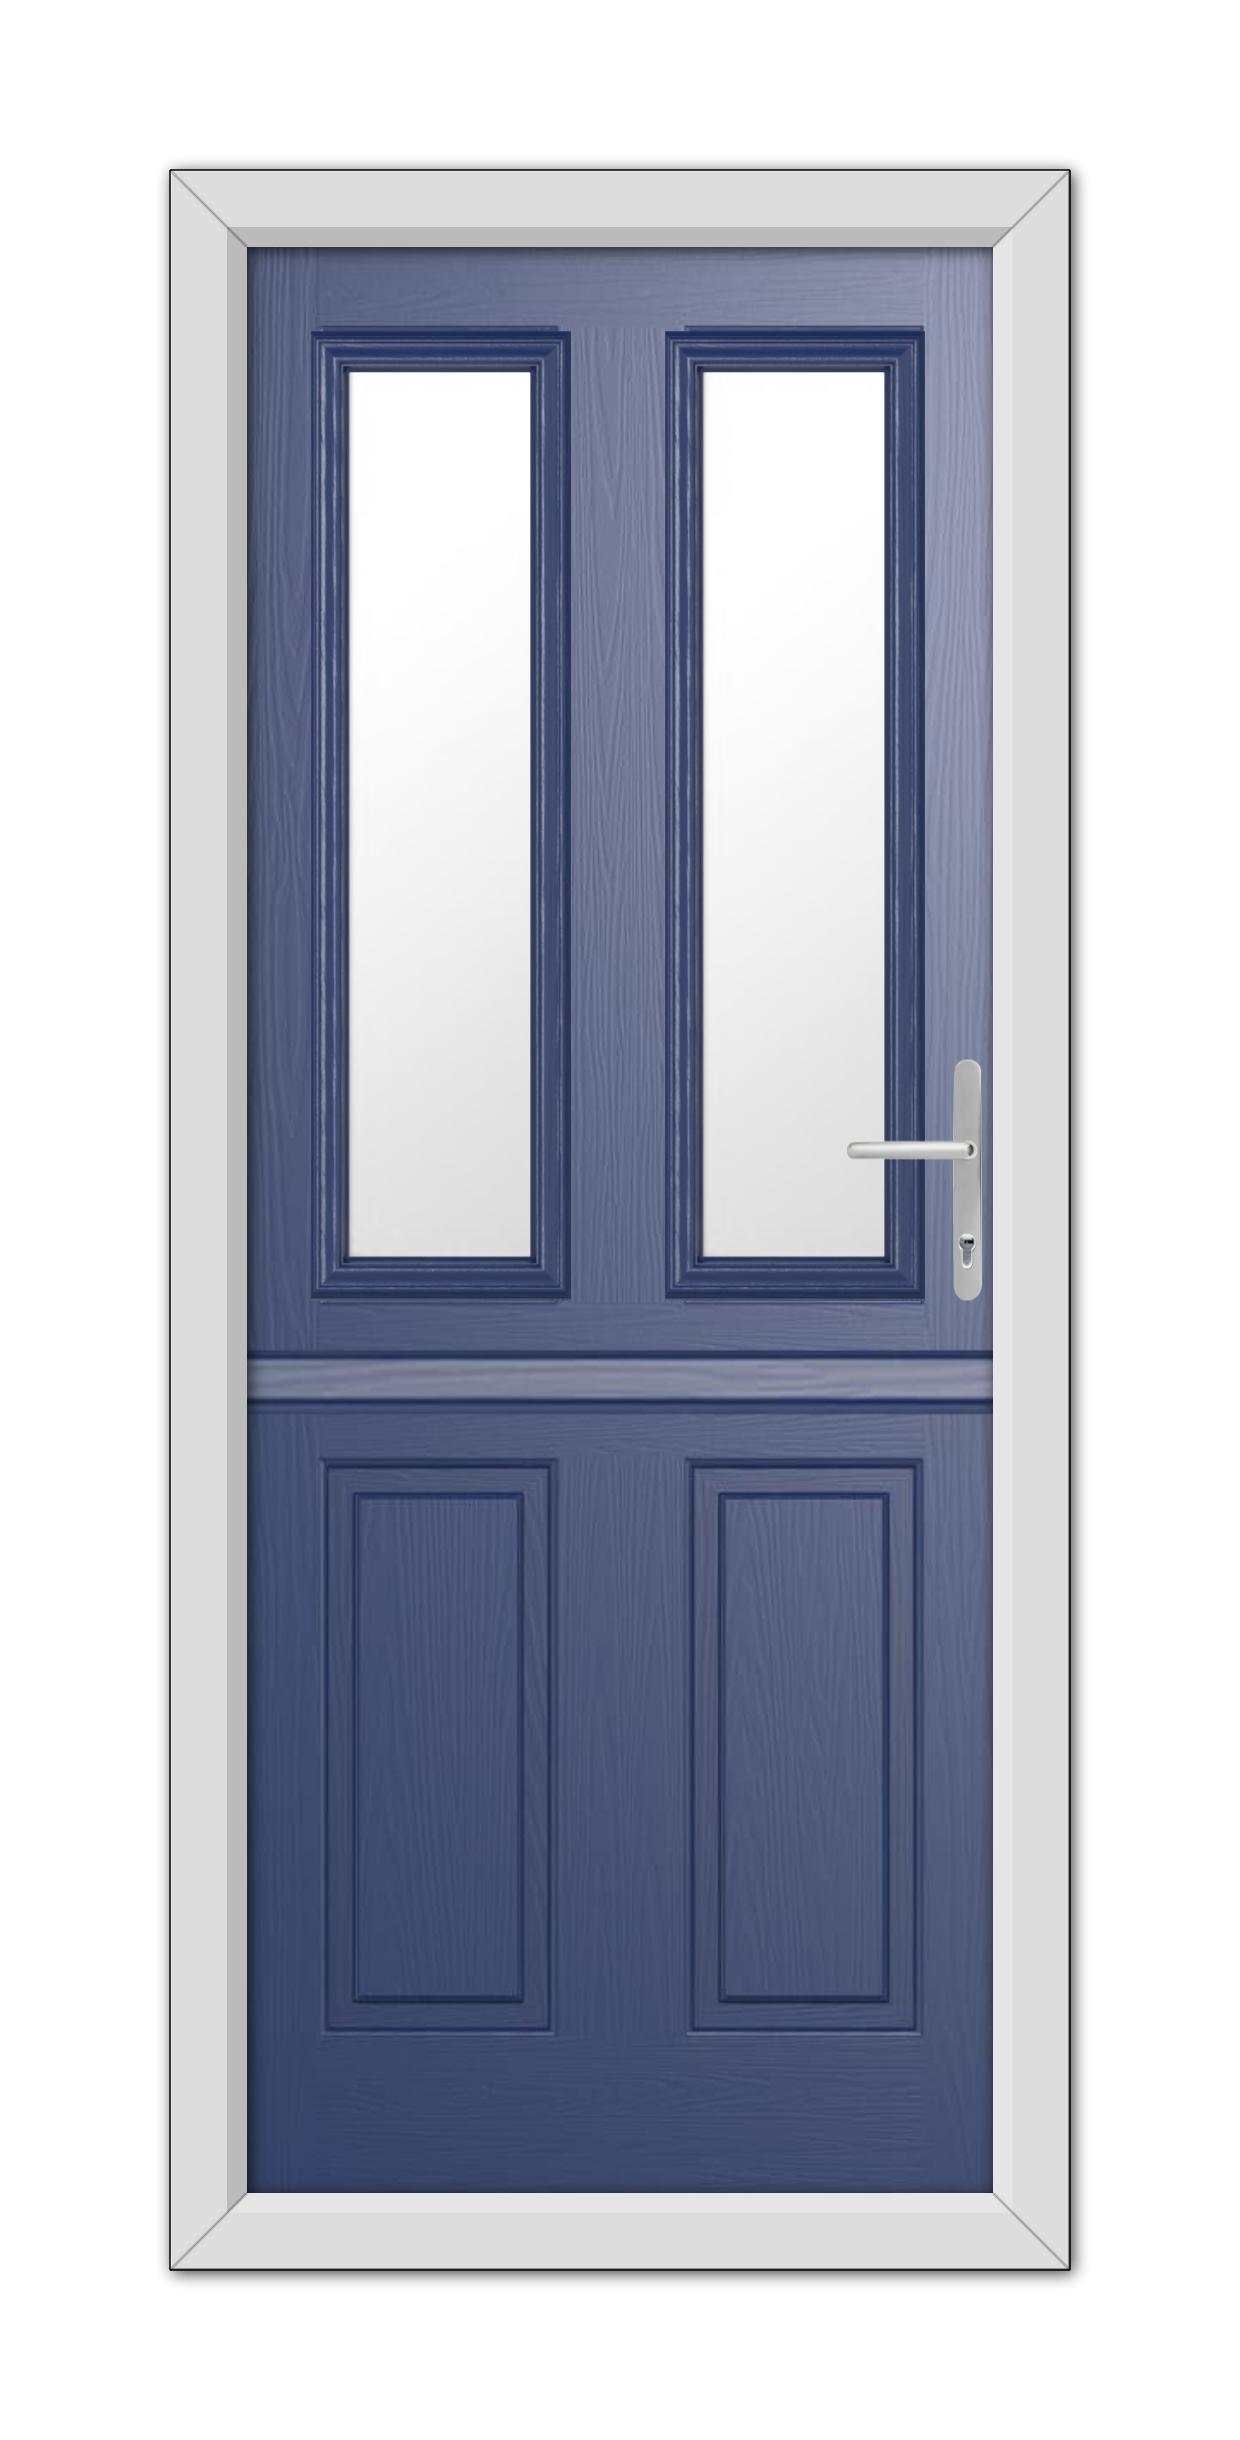 A modern Blue Whitmore Stable Composite Door 48mm Timber Core featuring two vertical glass panels and a silver handle, set within a white frame.